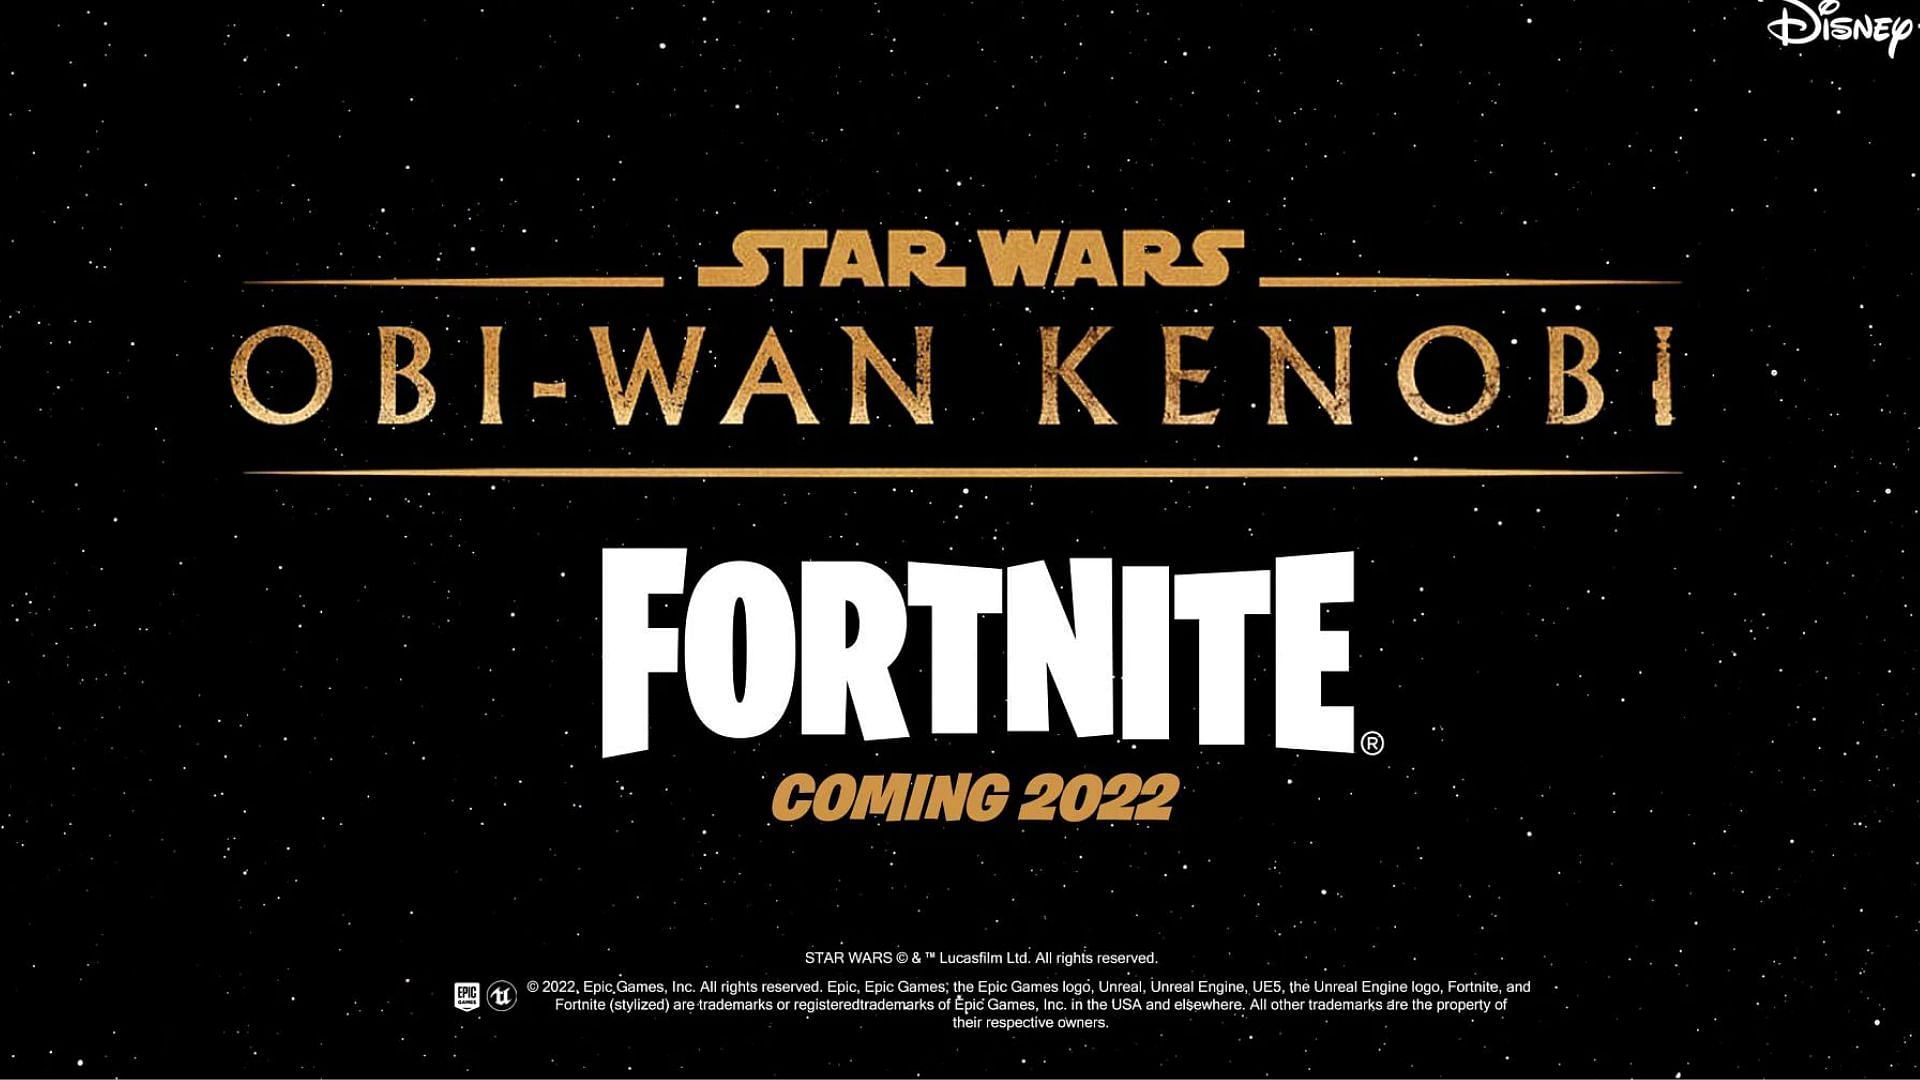 Fortnite players can expect an Obi-Wan Kenobi skin in the game real soon as the Star Wars collaboration is set to take place in Chapter 3 (Image via Twitter/ ShinaaBR)